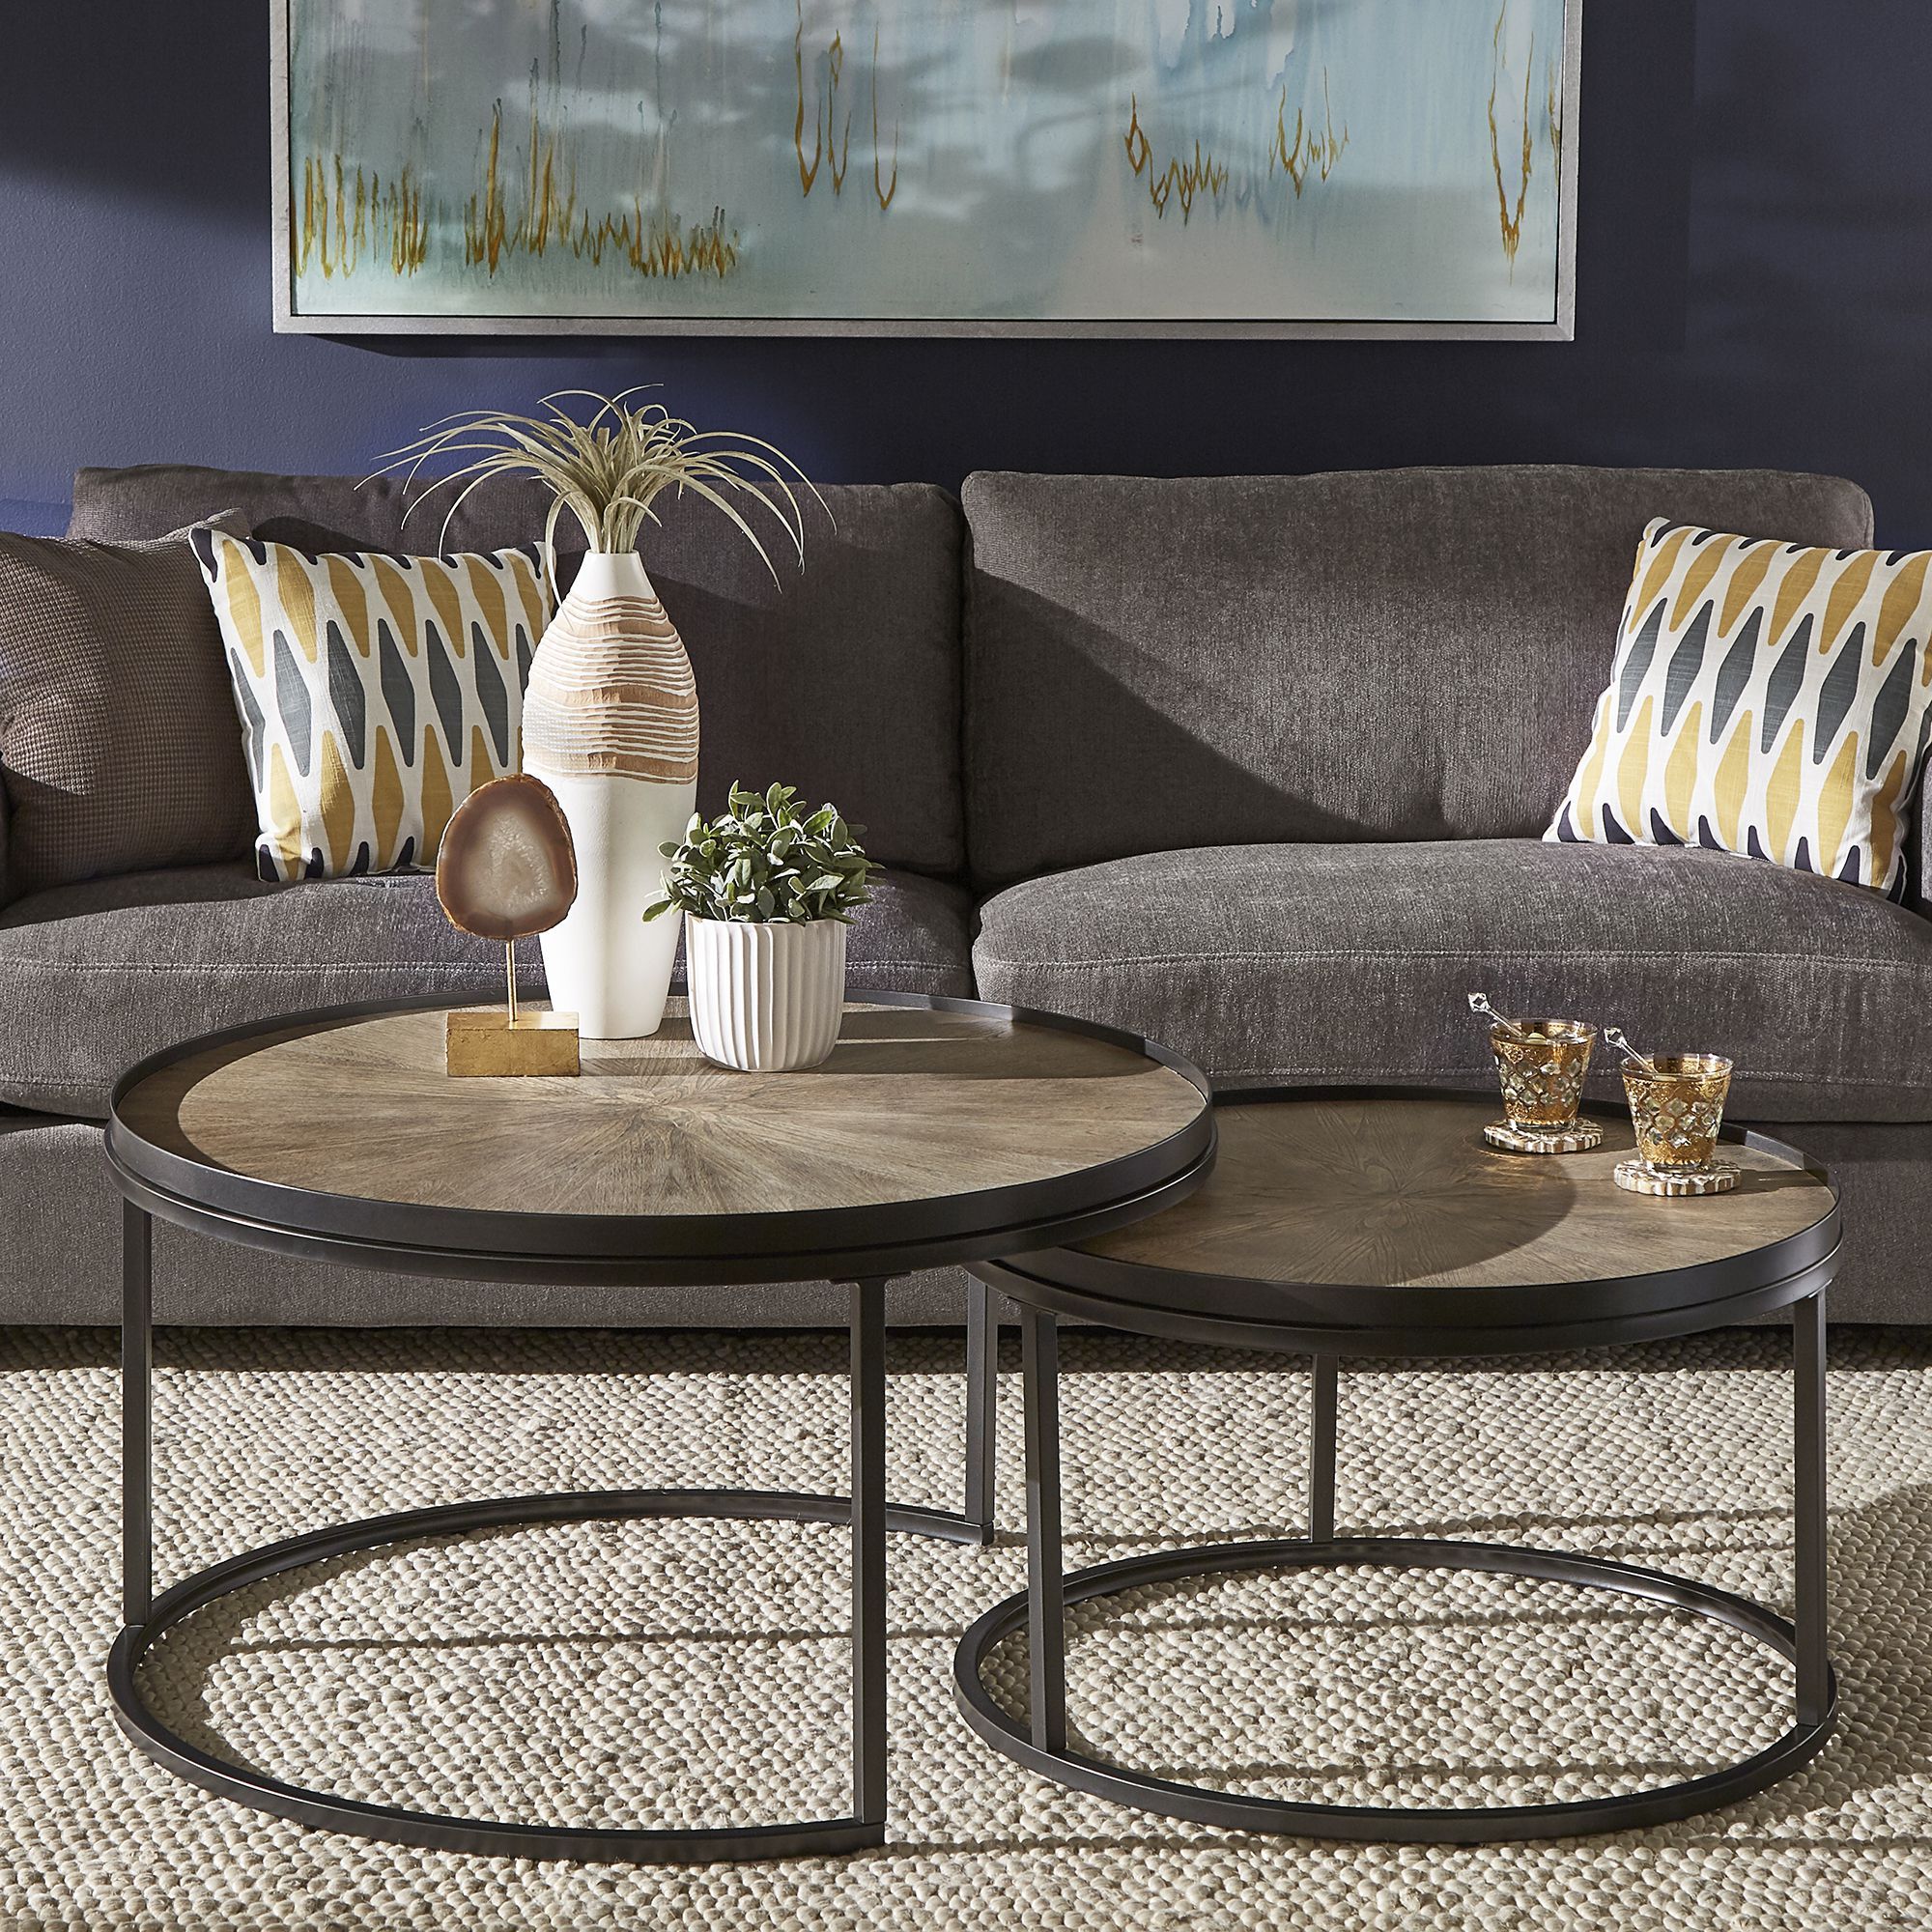 2019 Weston Home Bluff Grey Oak Finish Round Nesting Coffee Regarding Black And Oak Brown Coffee Tables (View 4 of 20)